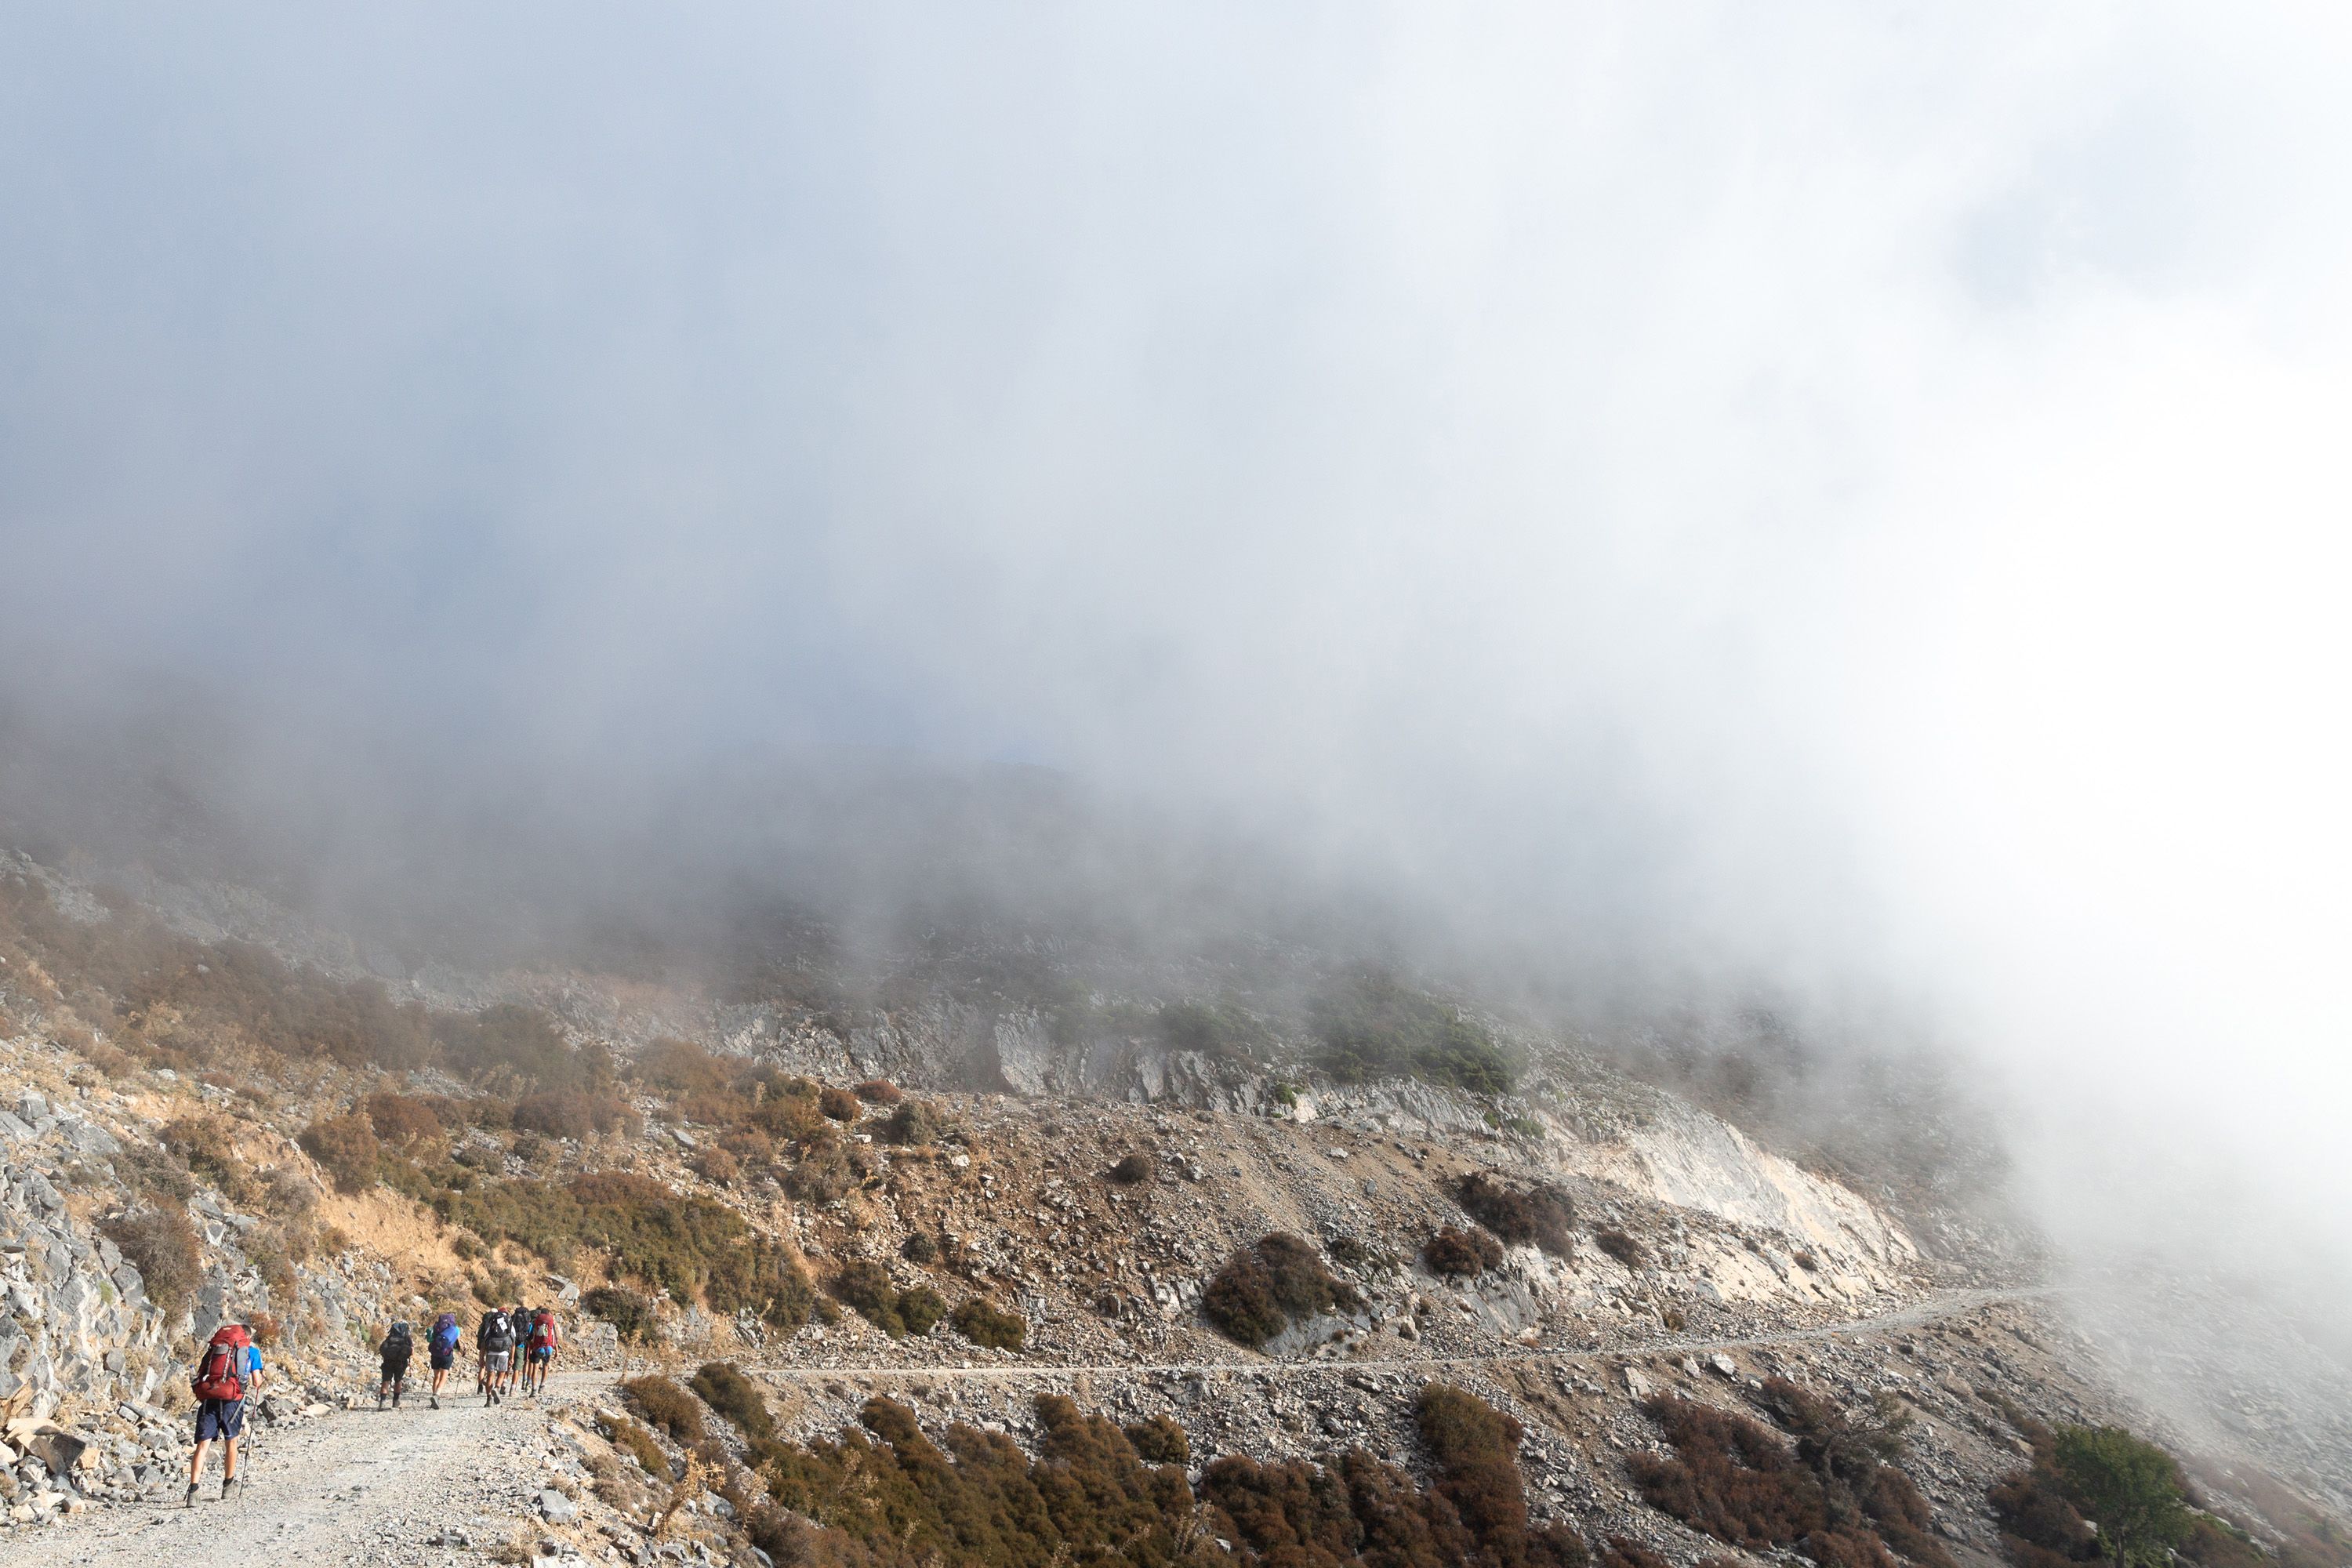 Students hiking along the side of a scree-strewn mountain in Crete. Mist obscures the ground above and ahead of them.